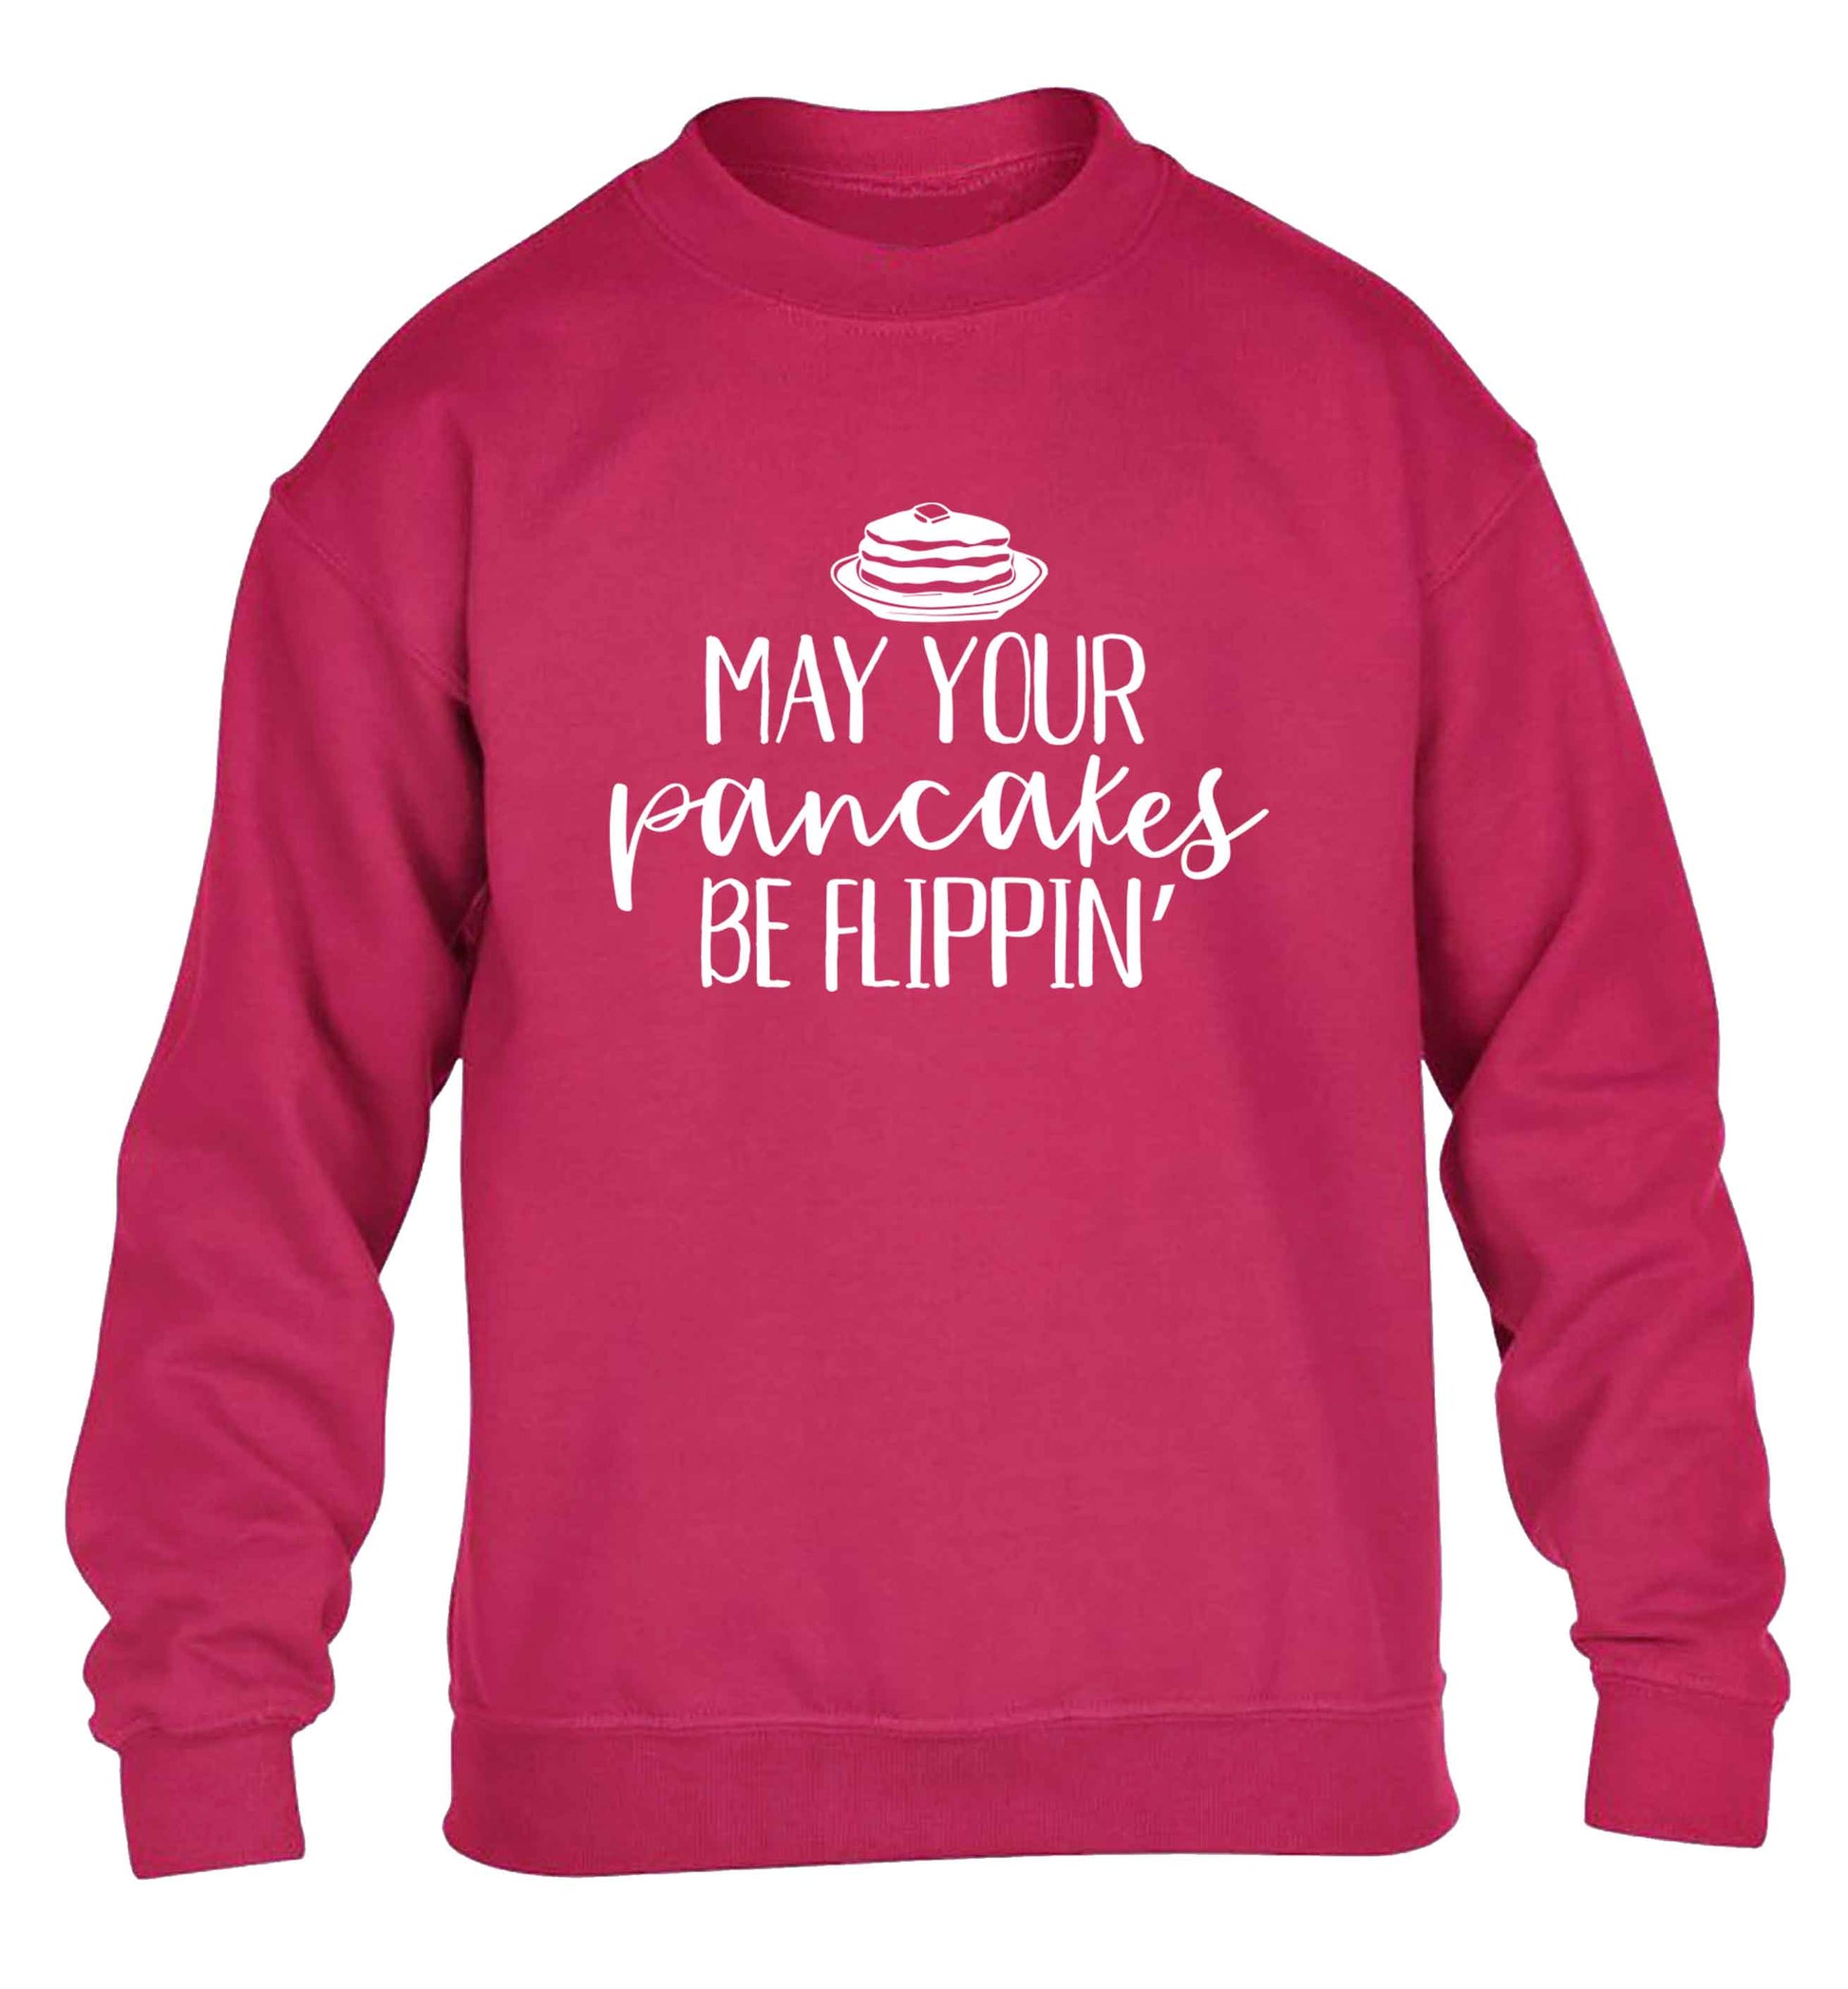 May your pancakes be flippin' children's pink sweater 12-13 Years